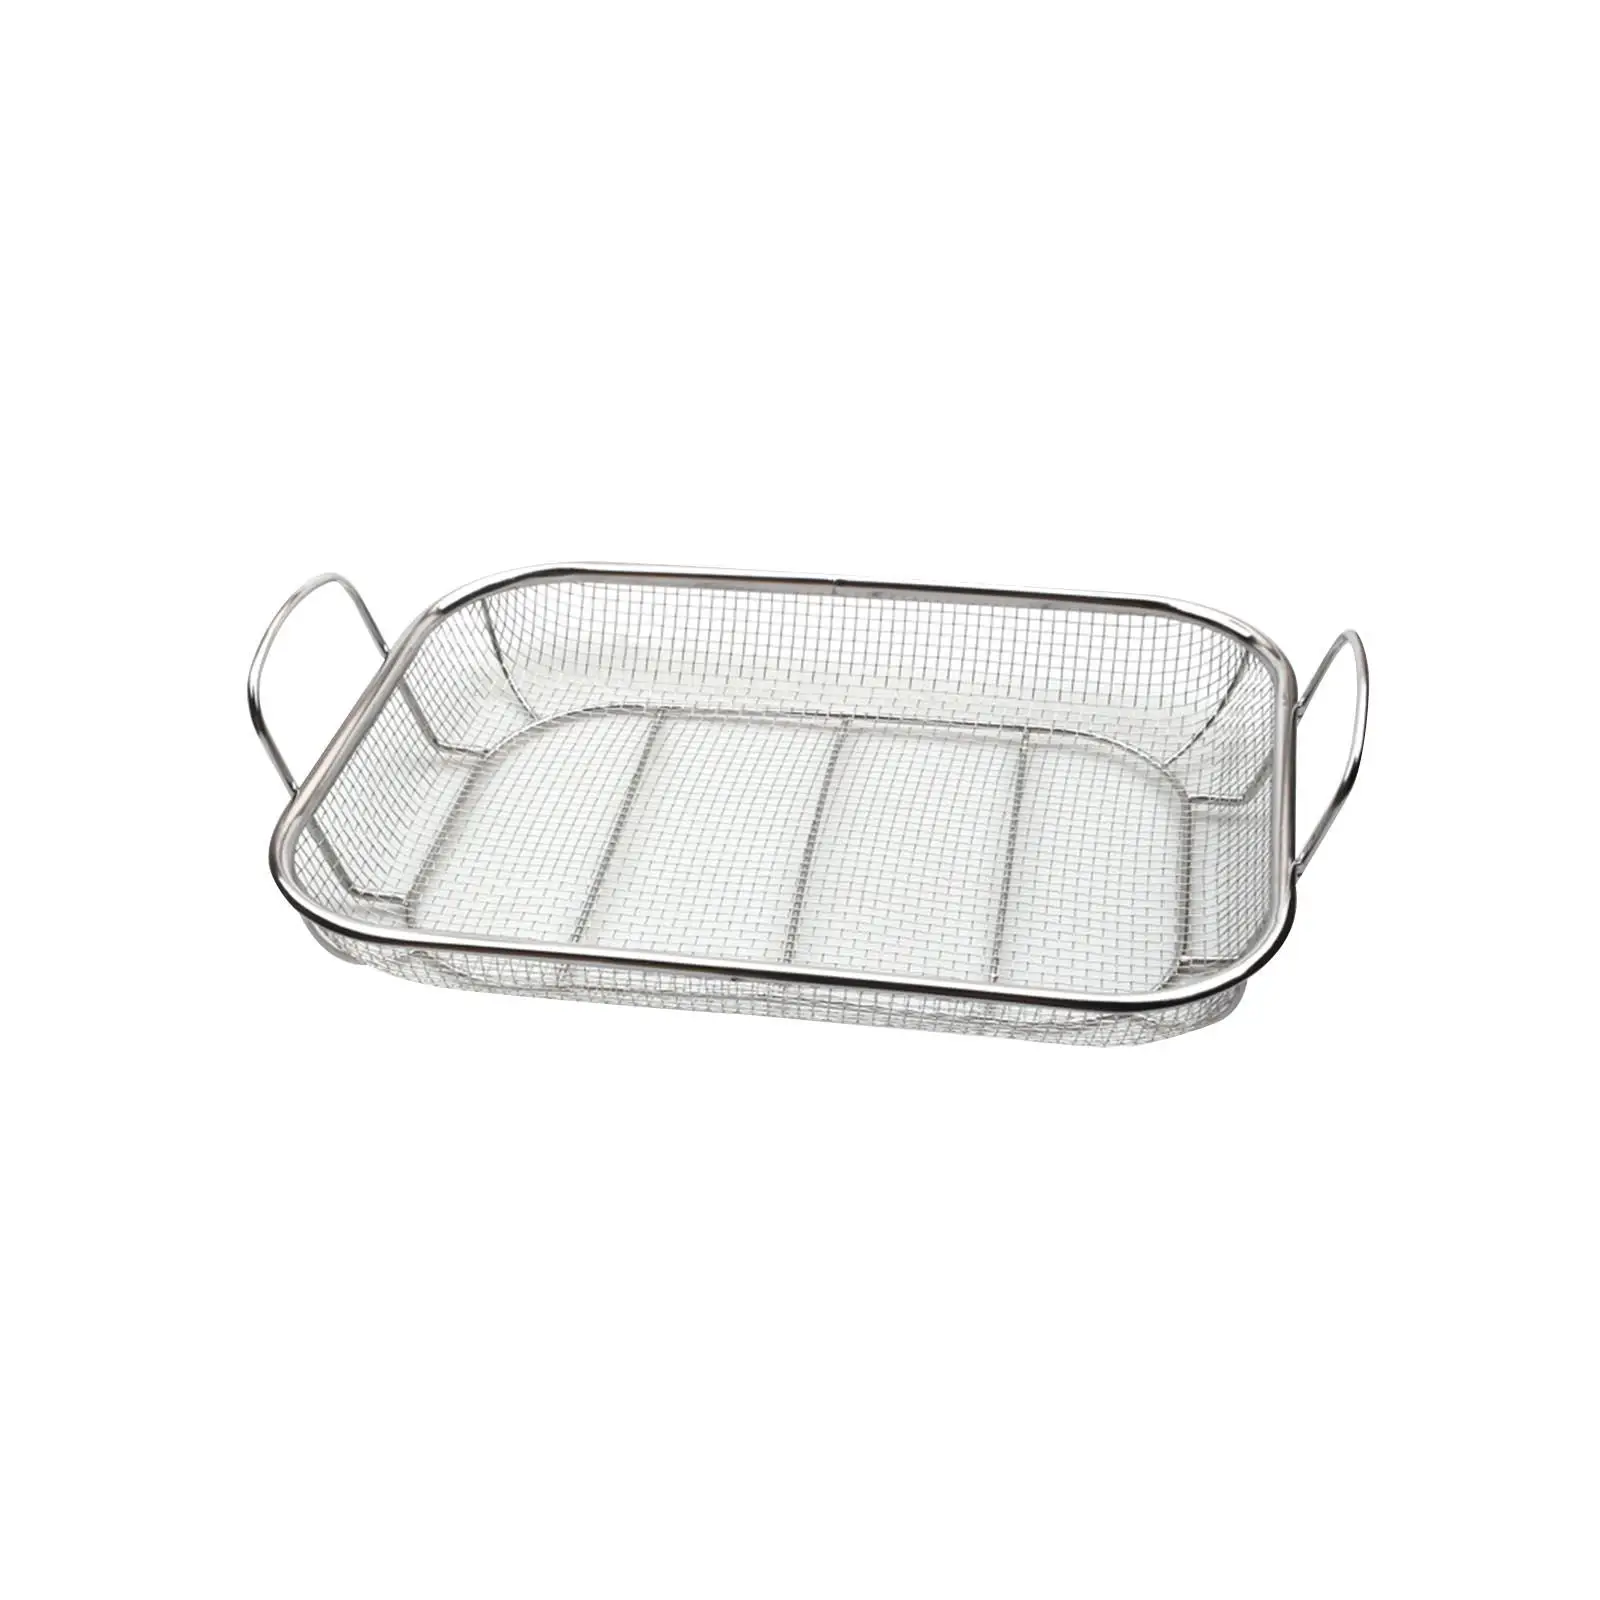 Stainless Steel Mesh BBQ Grilling Basket Grid Mesh Bottom Multipurpose Thickened Frame Durable Rectangle for Meats and Fish